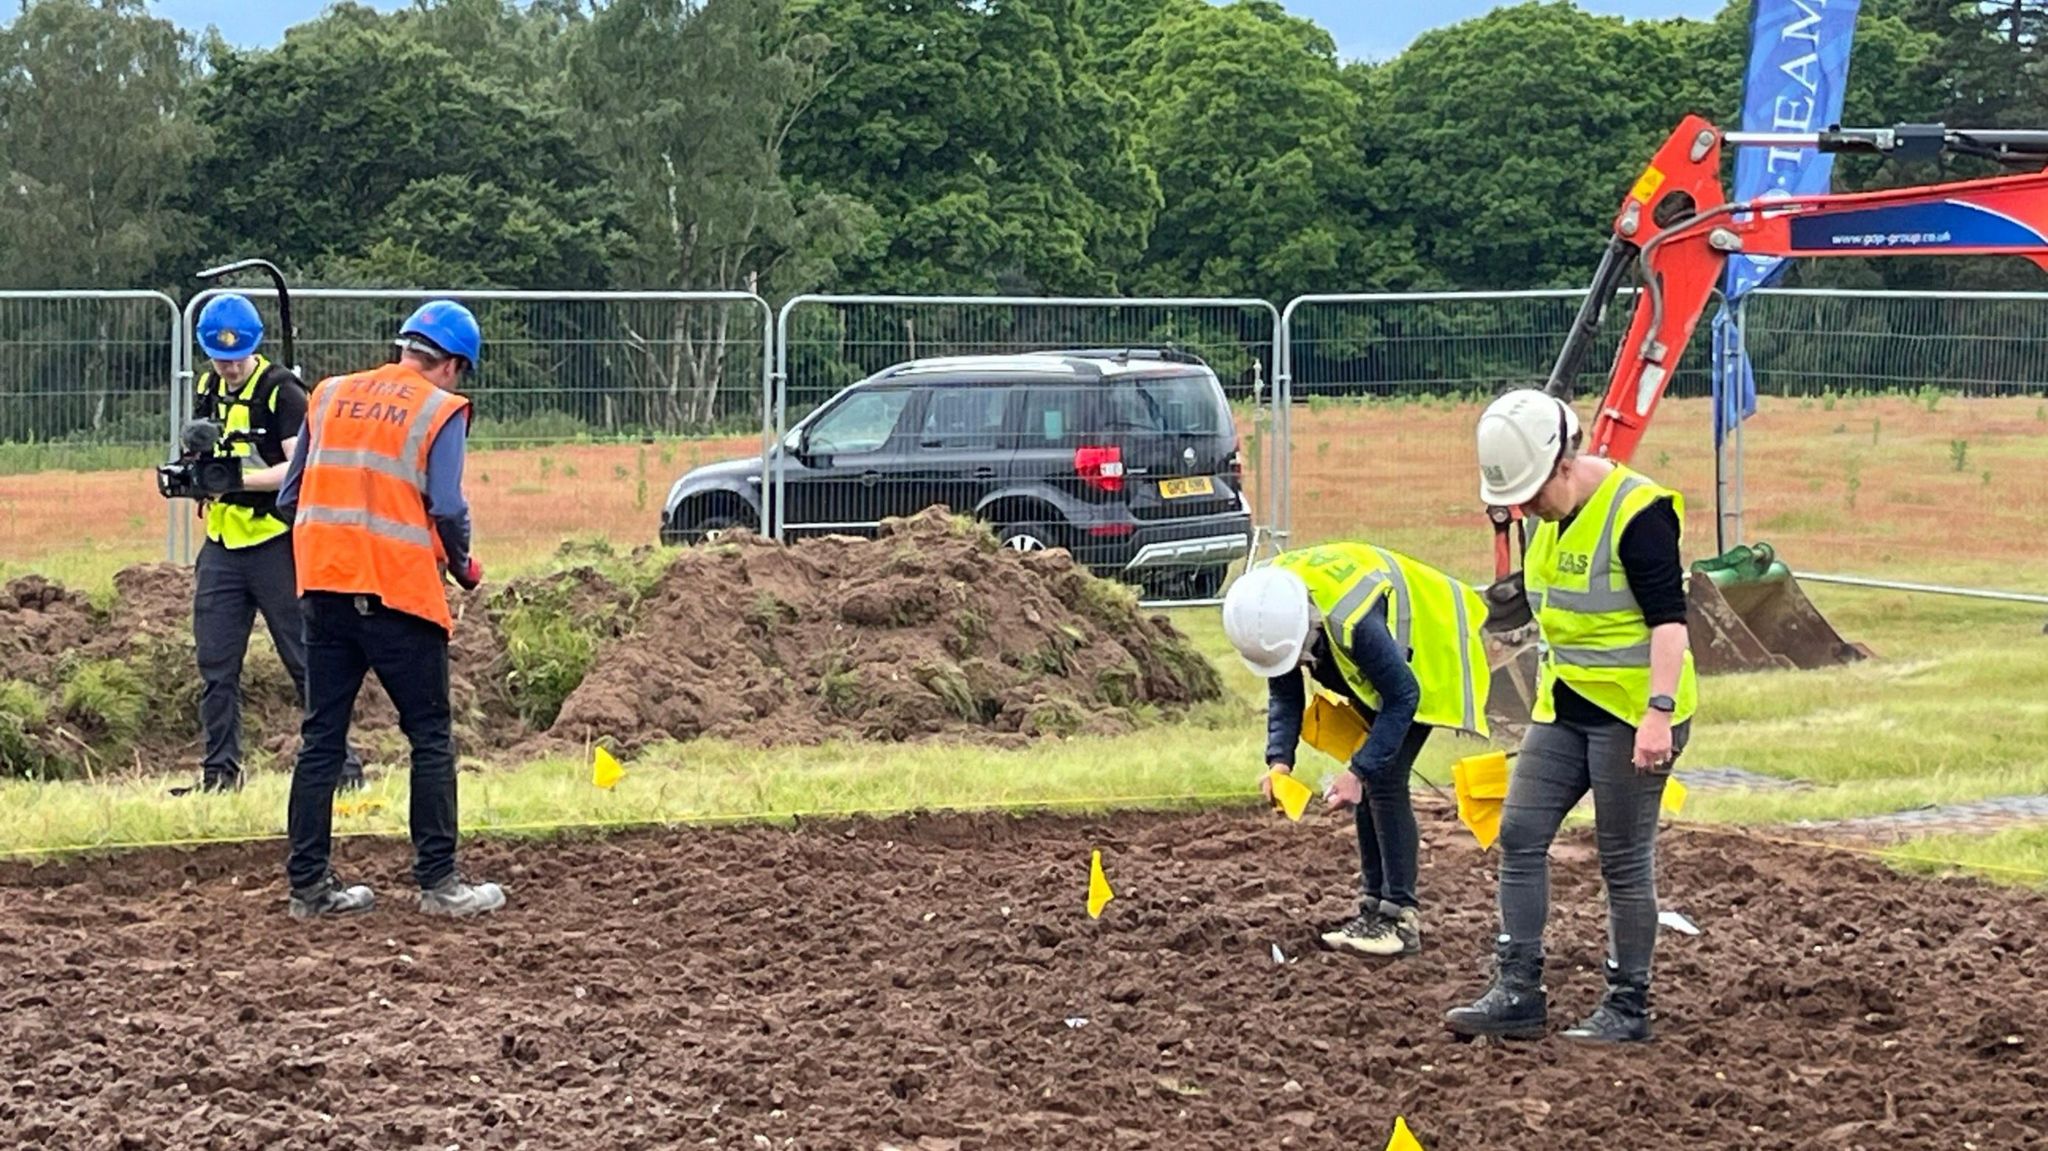 Excavation teams at Sutton Hoo beginning on the two-year research project